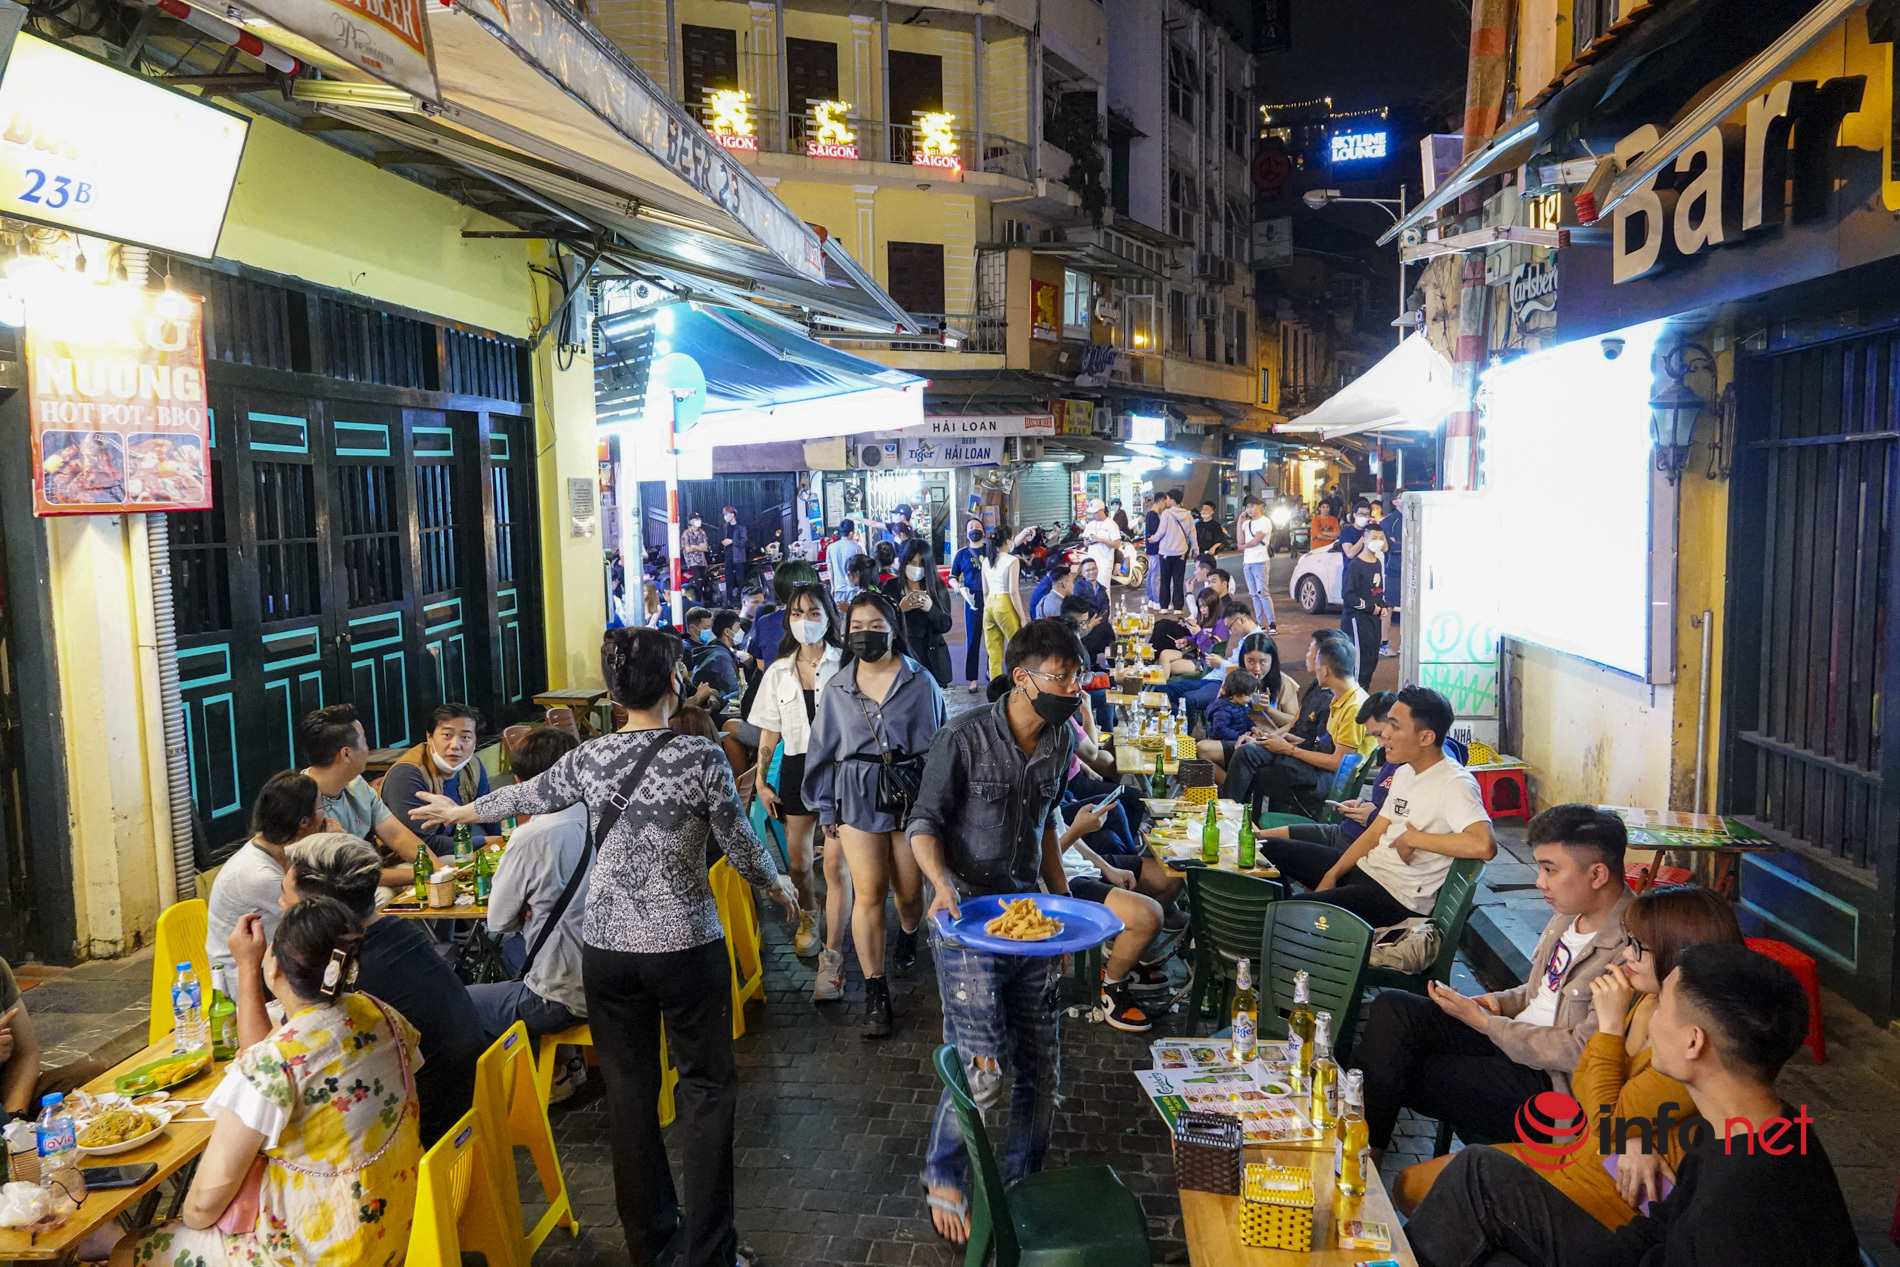 Restaurants can operate normally, Hanoi's 